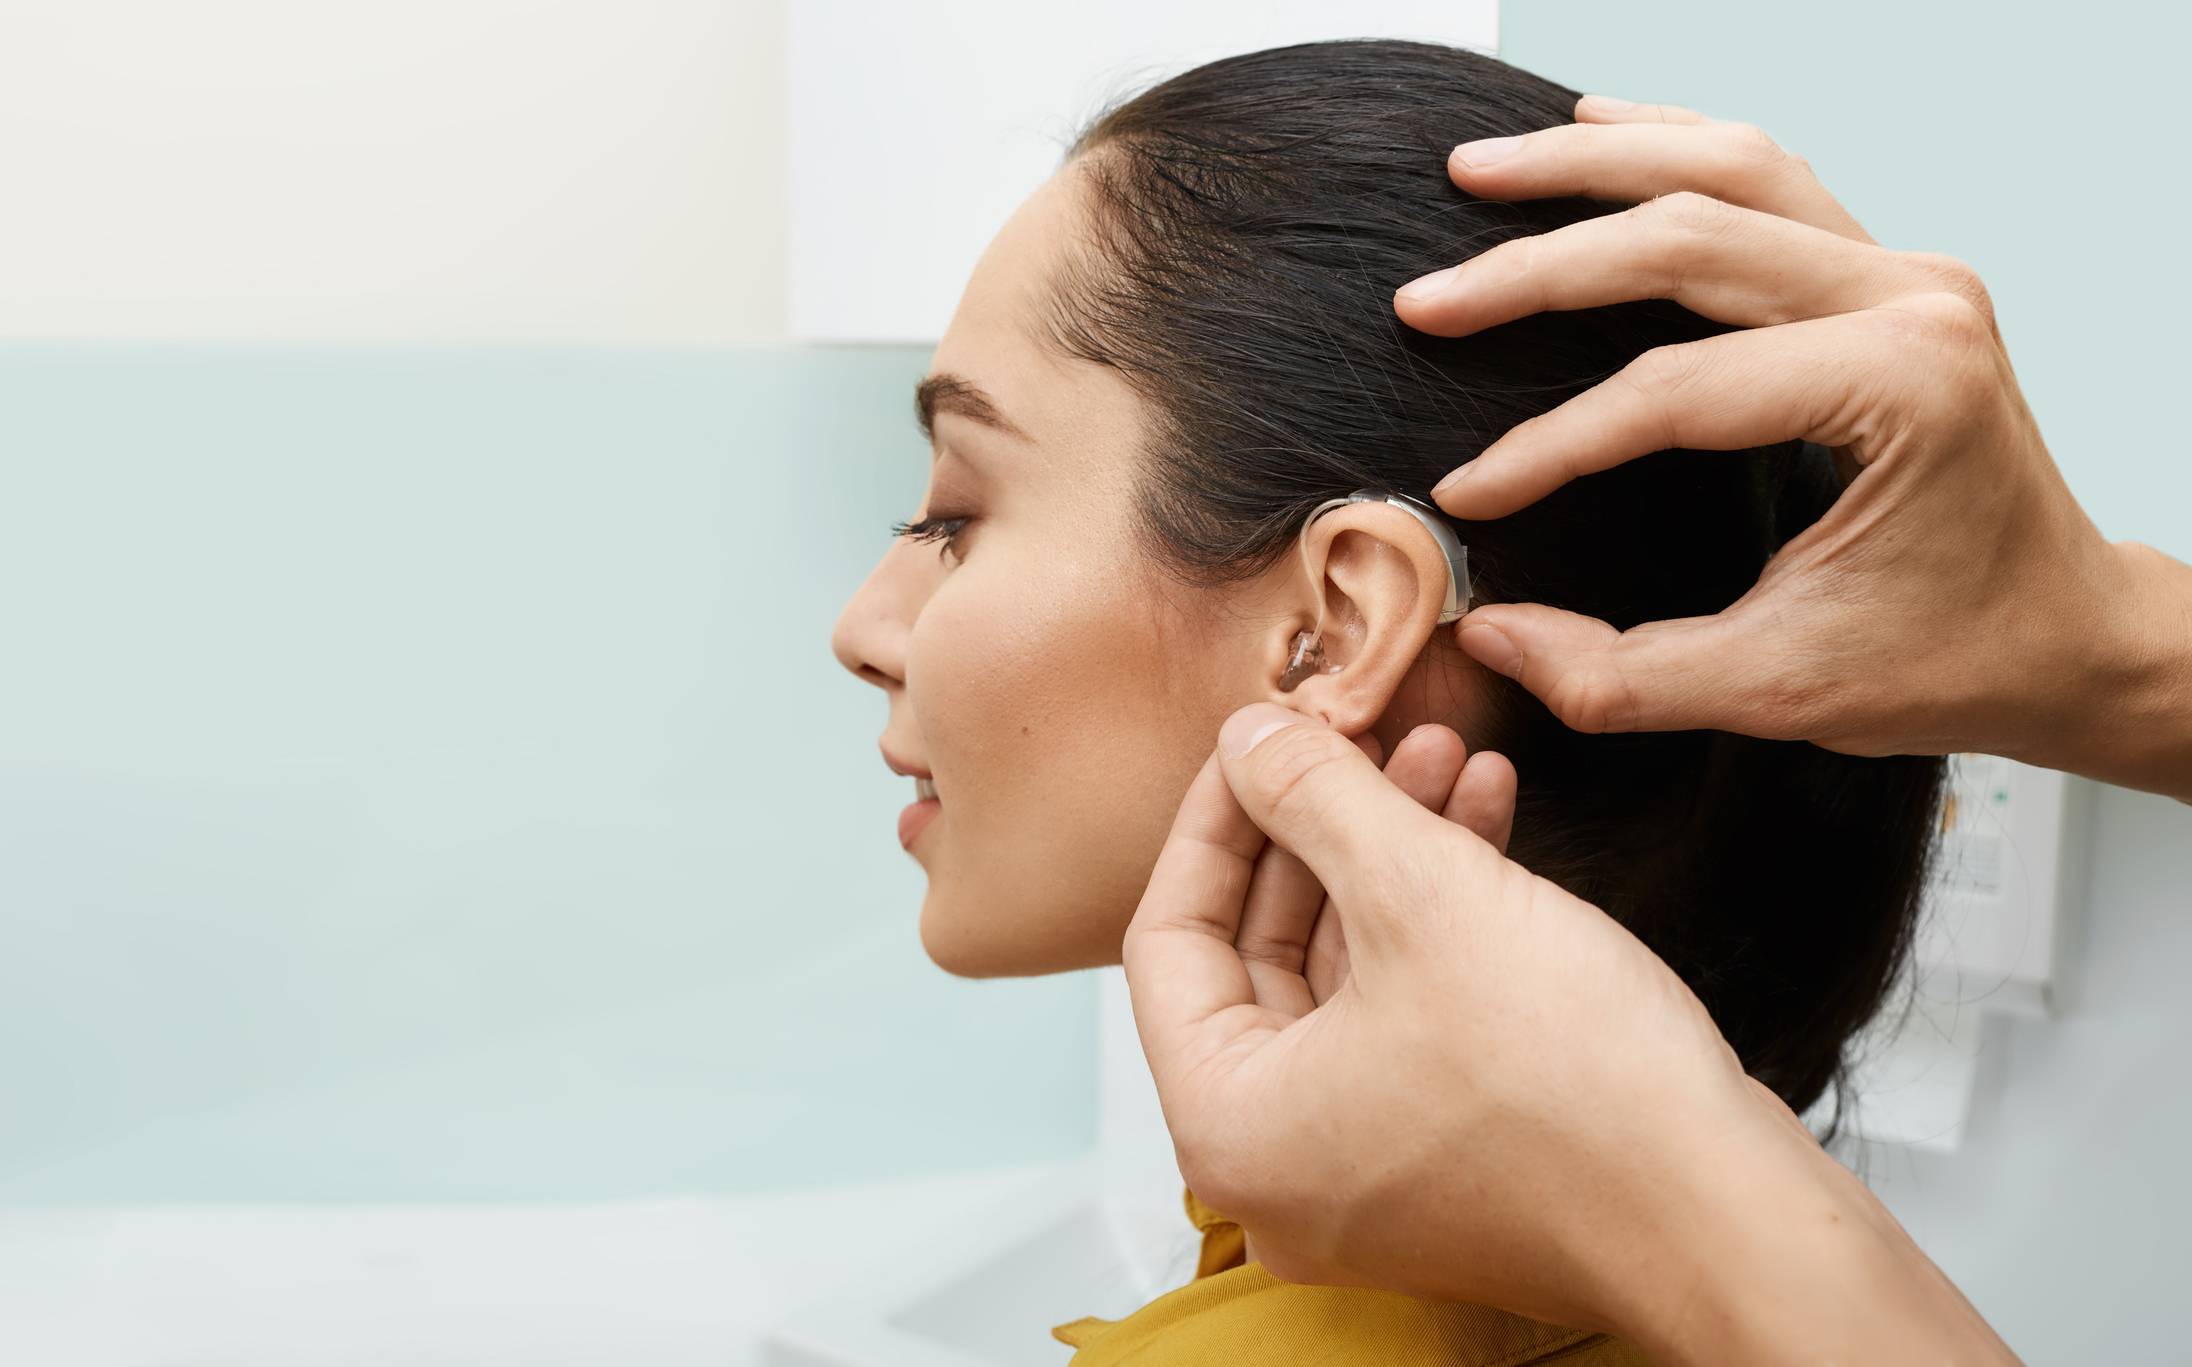 5 myths you may have heard about hearing aids